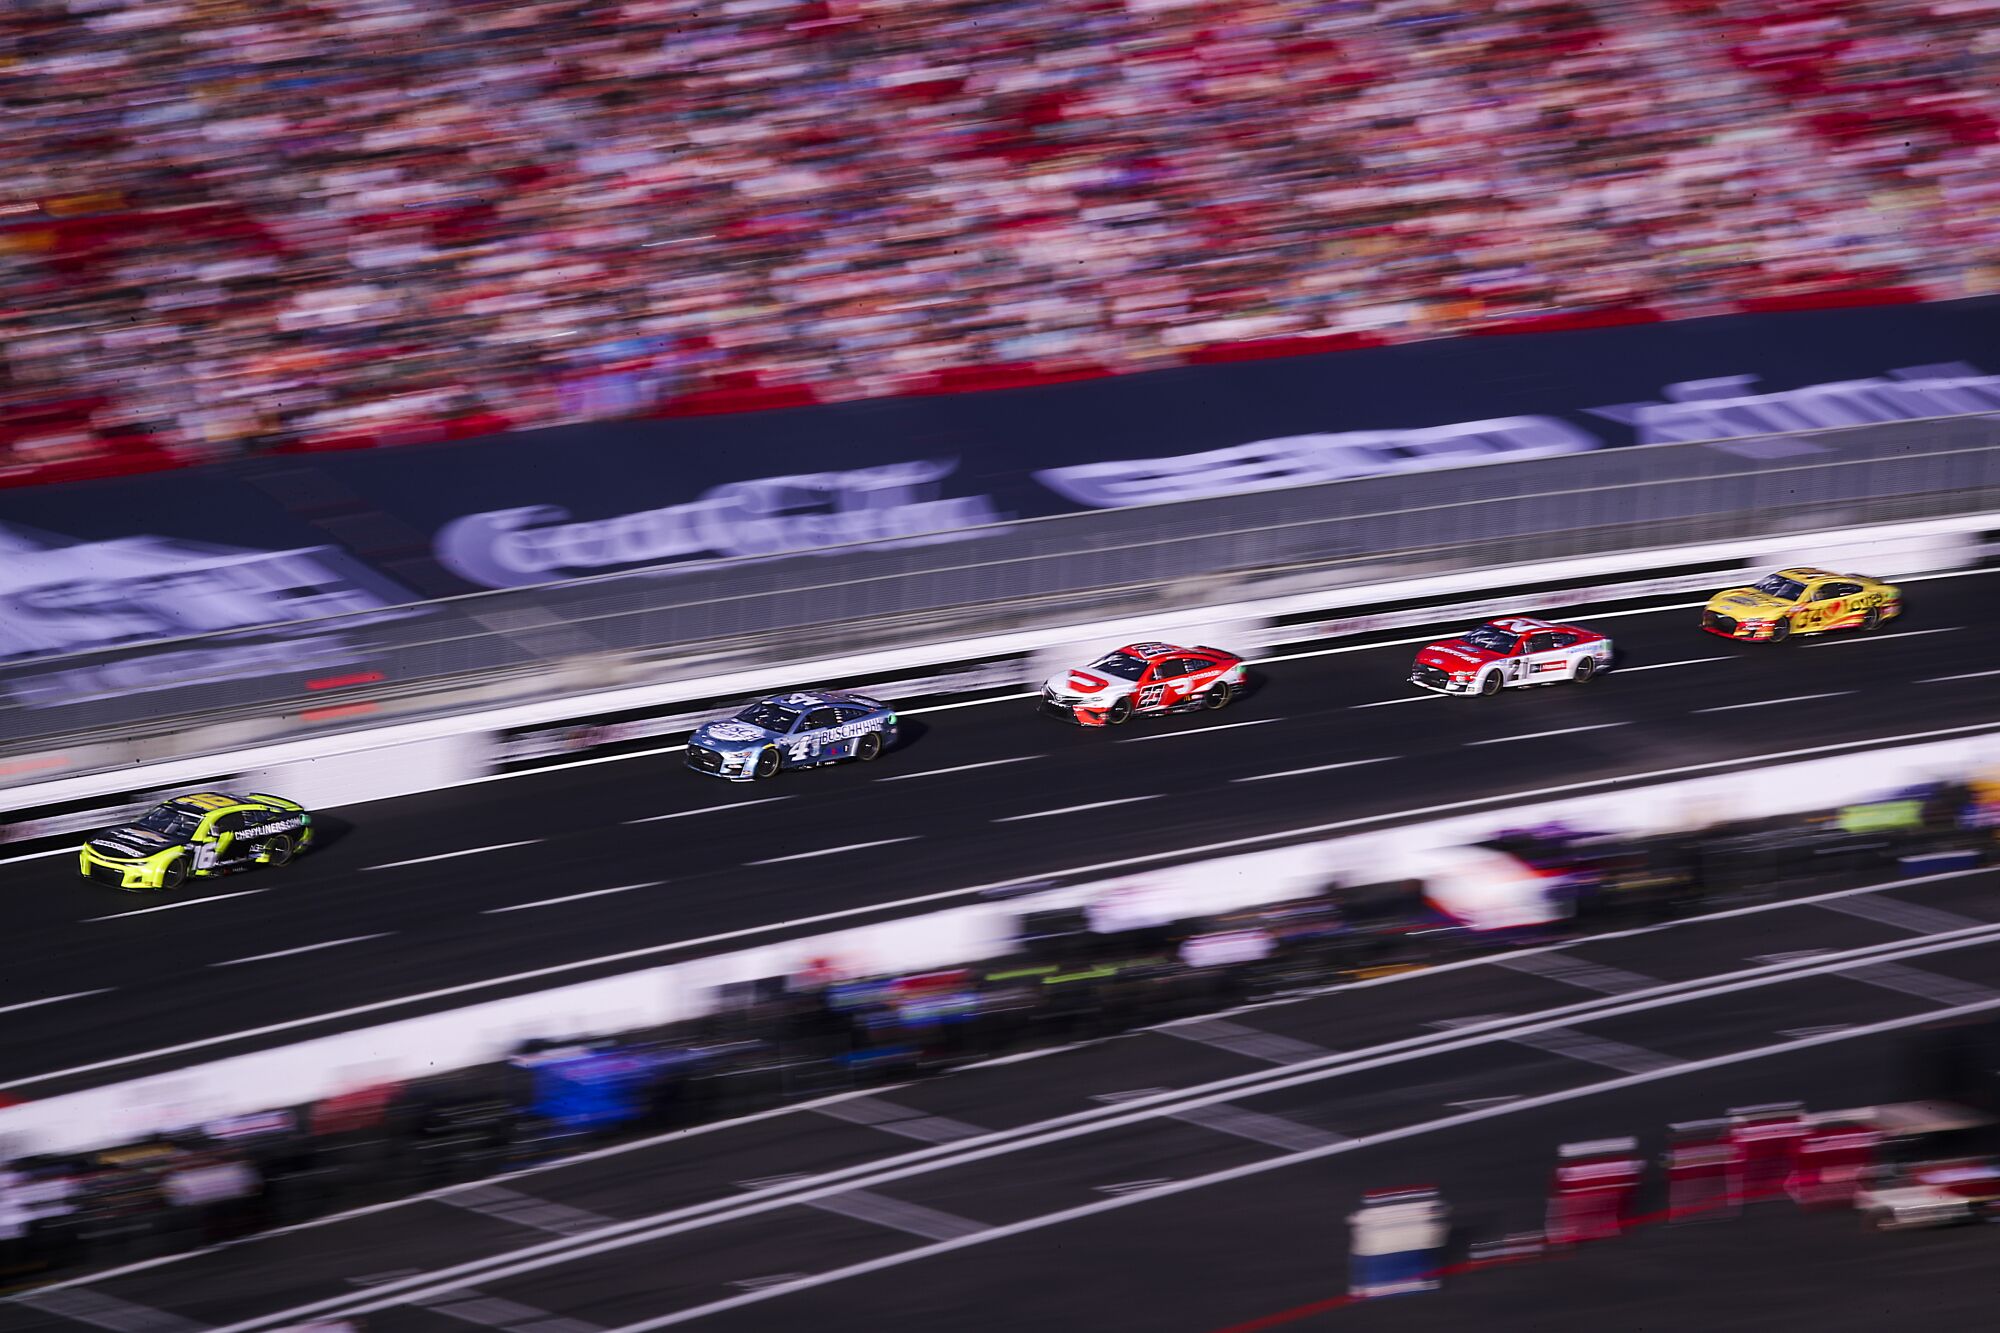 The pack of cars race around the quarter-mile track at the Coliseum.